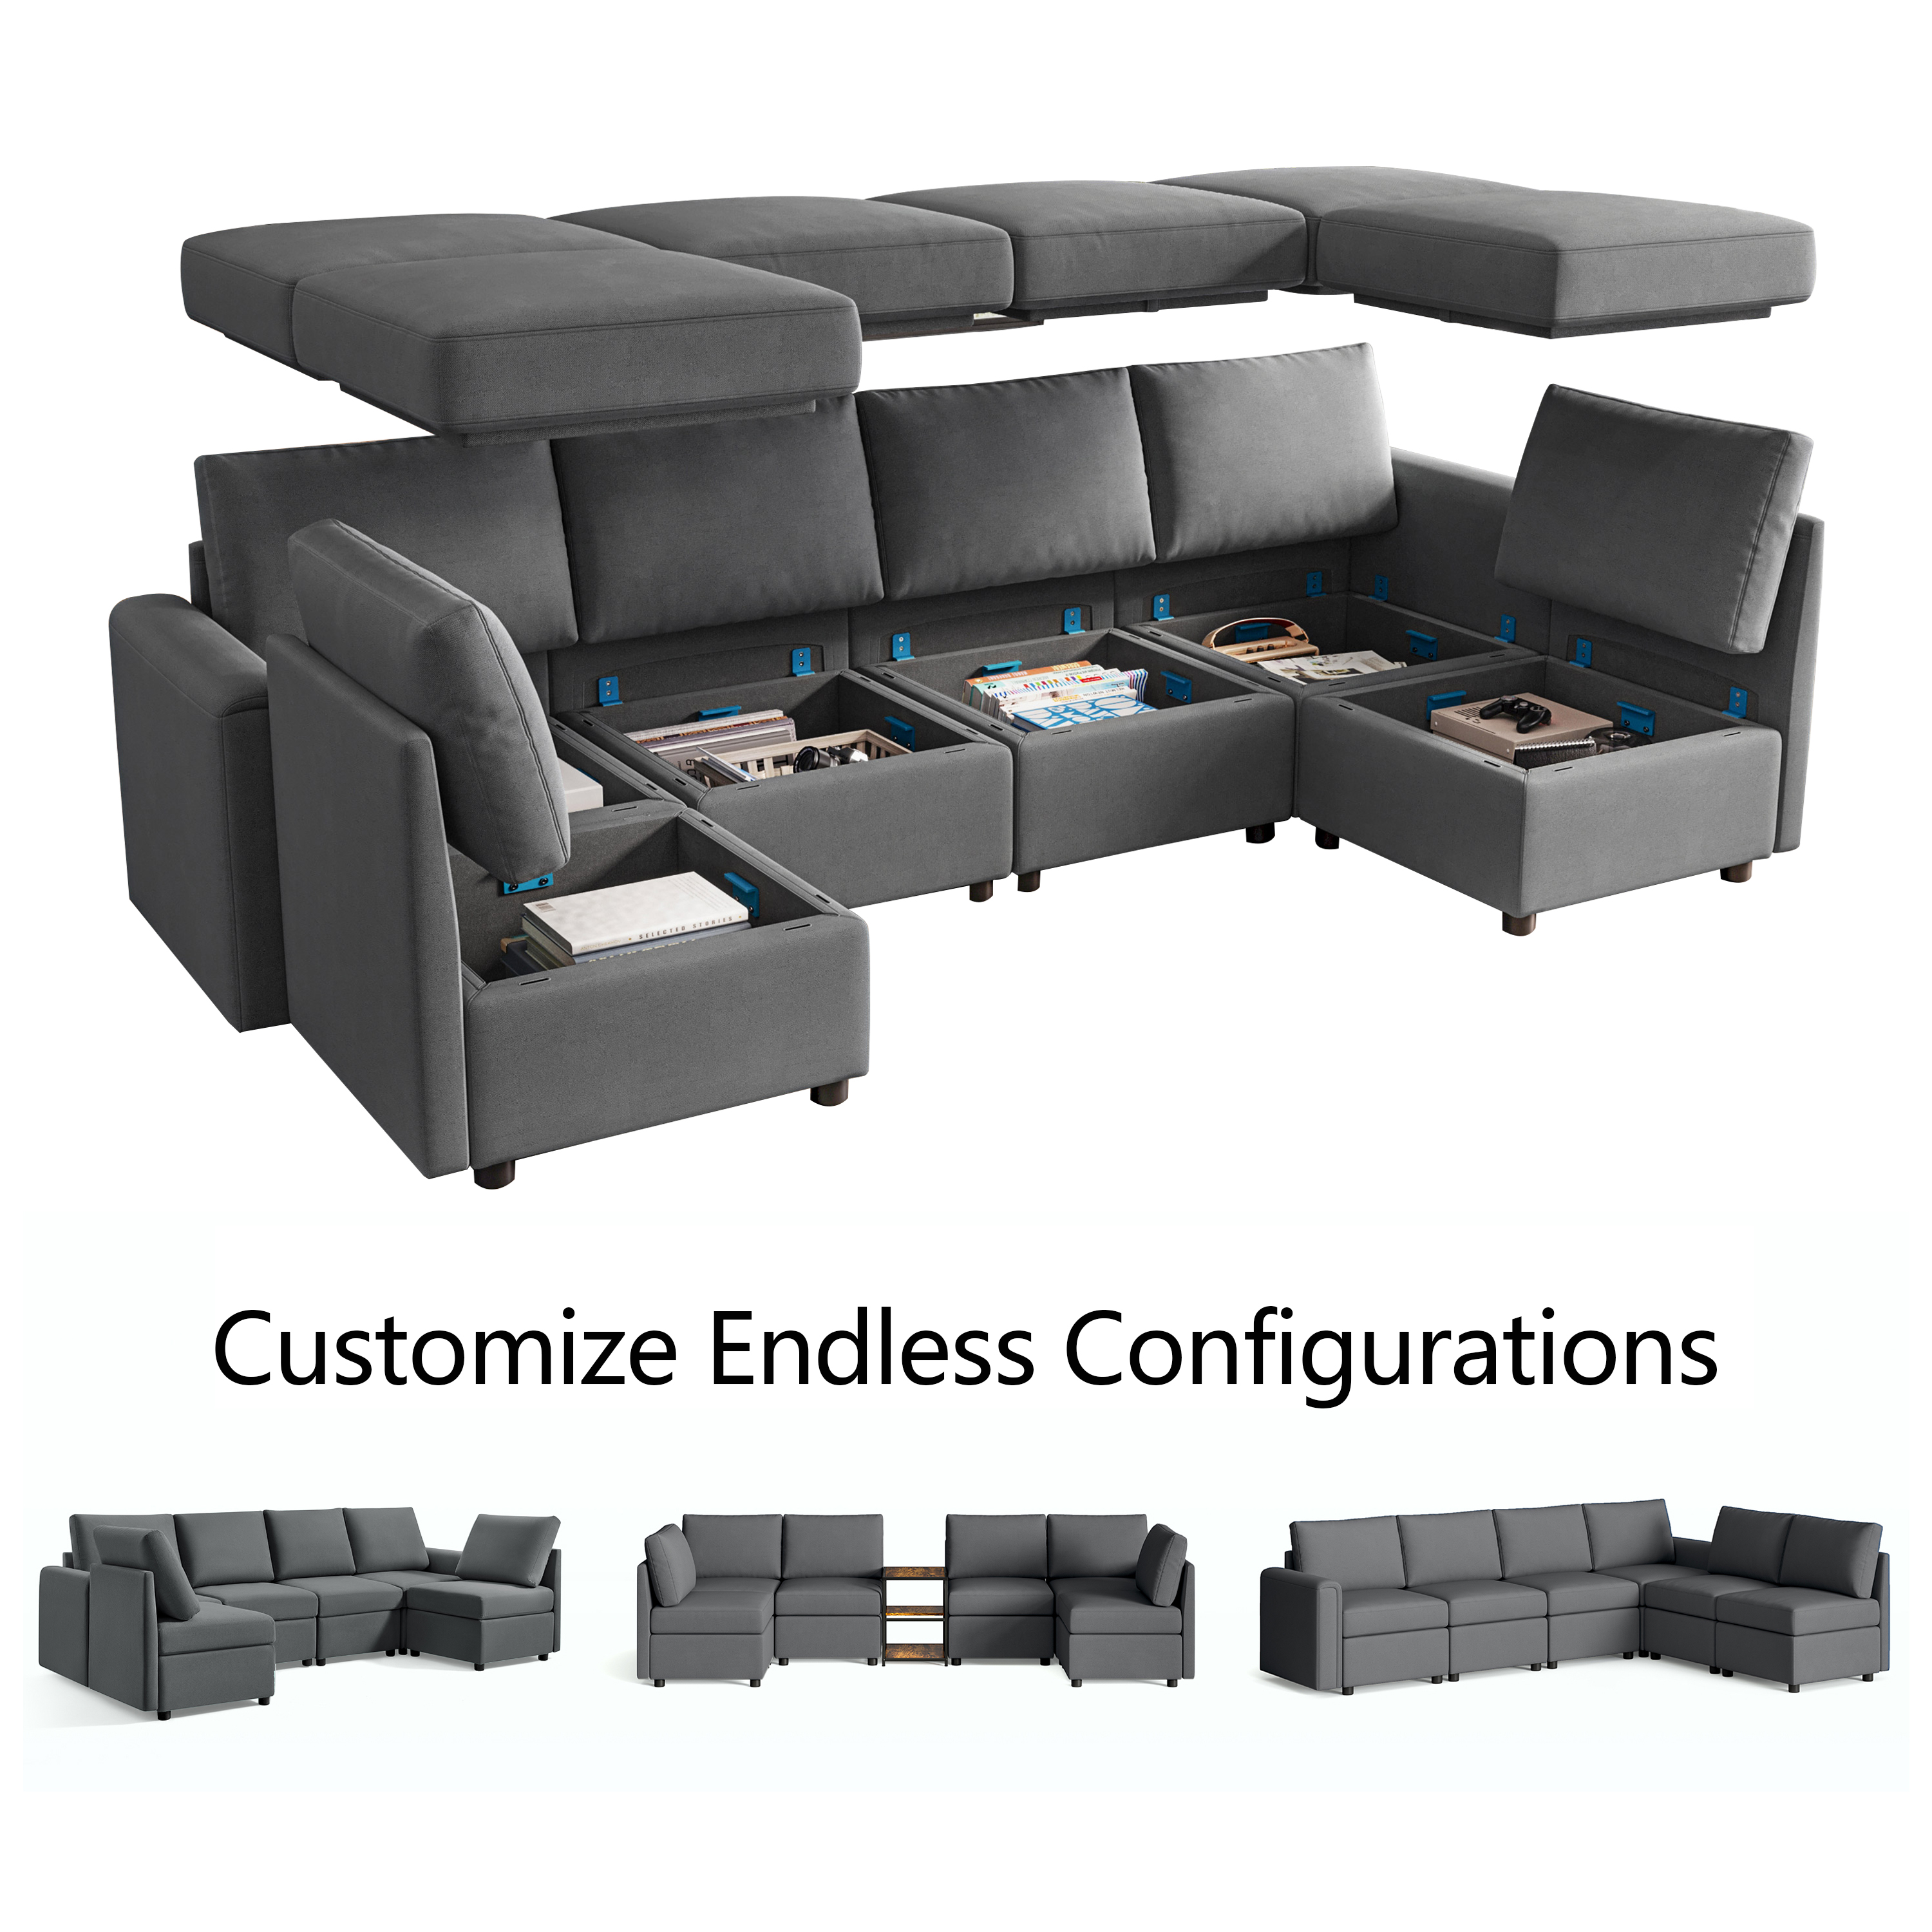 LINSY HOME Modular Couches and Sofas Sectional with Storage Sectional Sofa U Shaped Sectional Couch with Reversible Chaises, Dark Gray - image 1 of 13